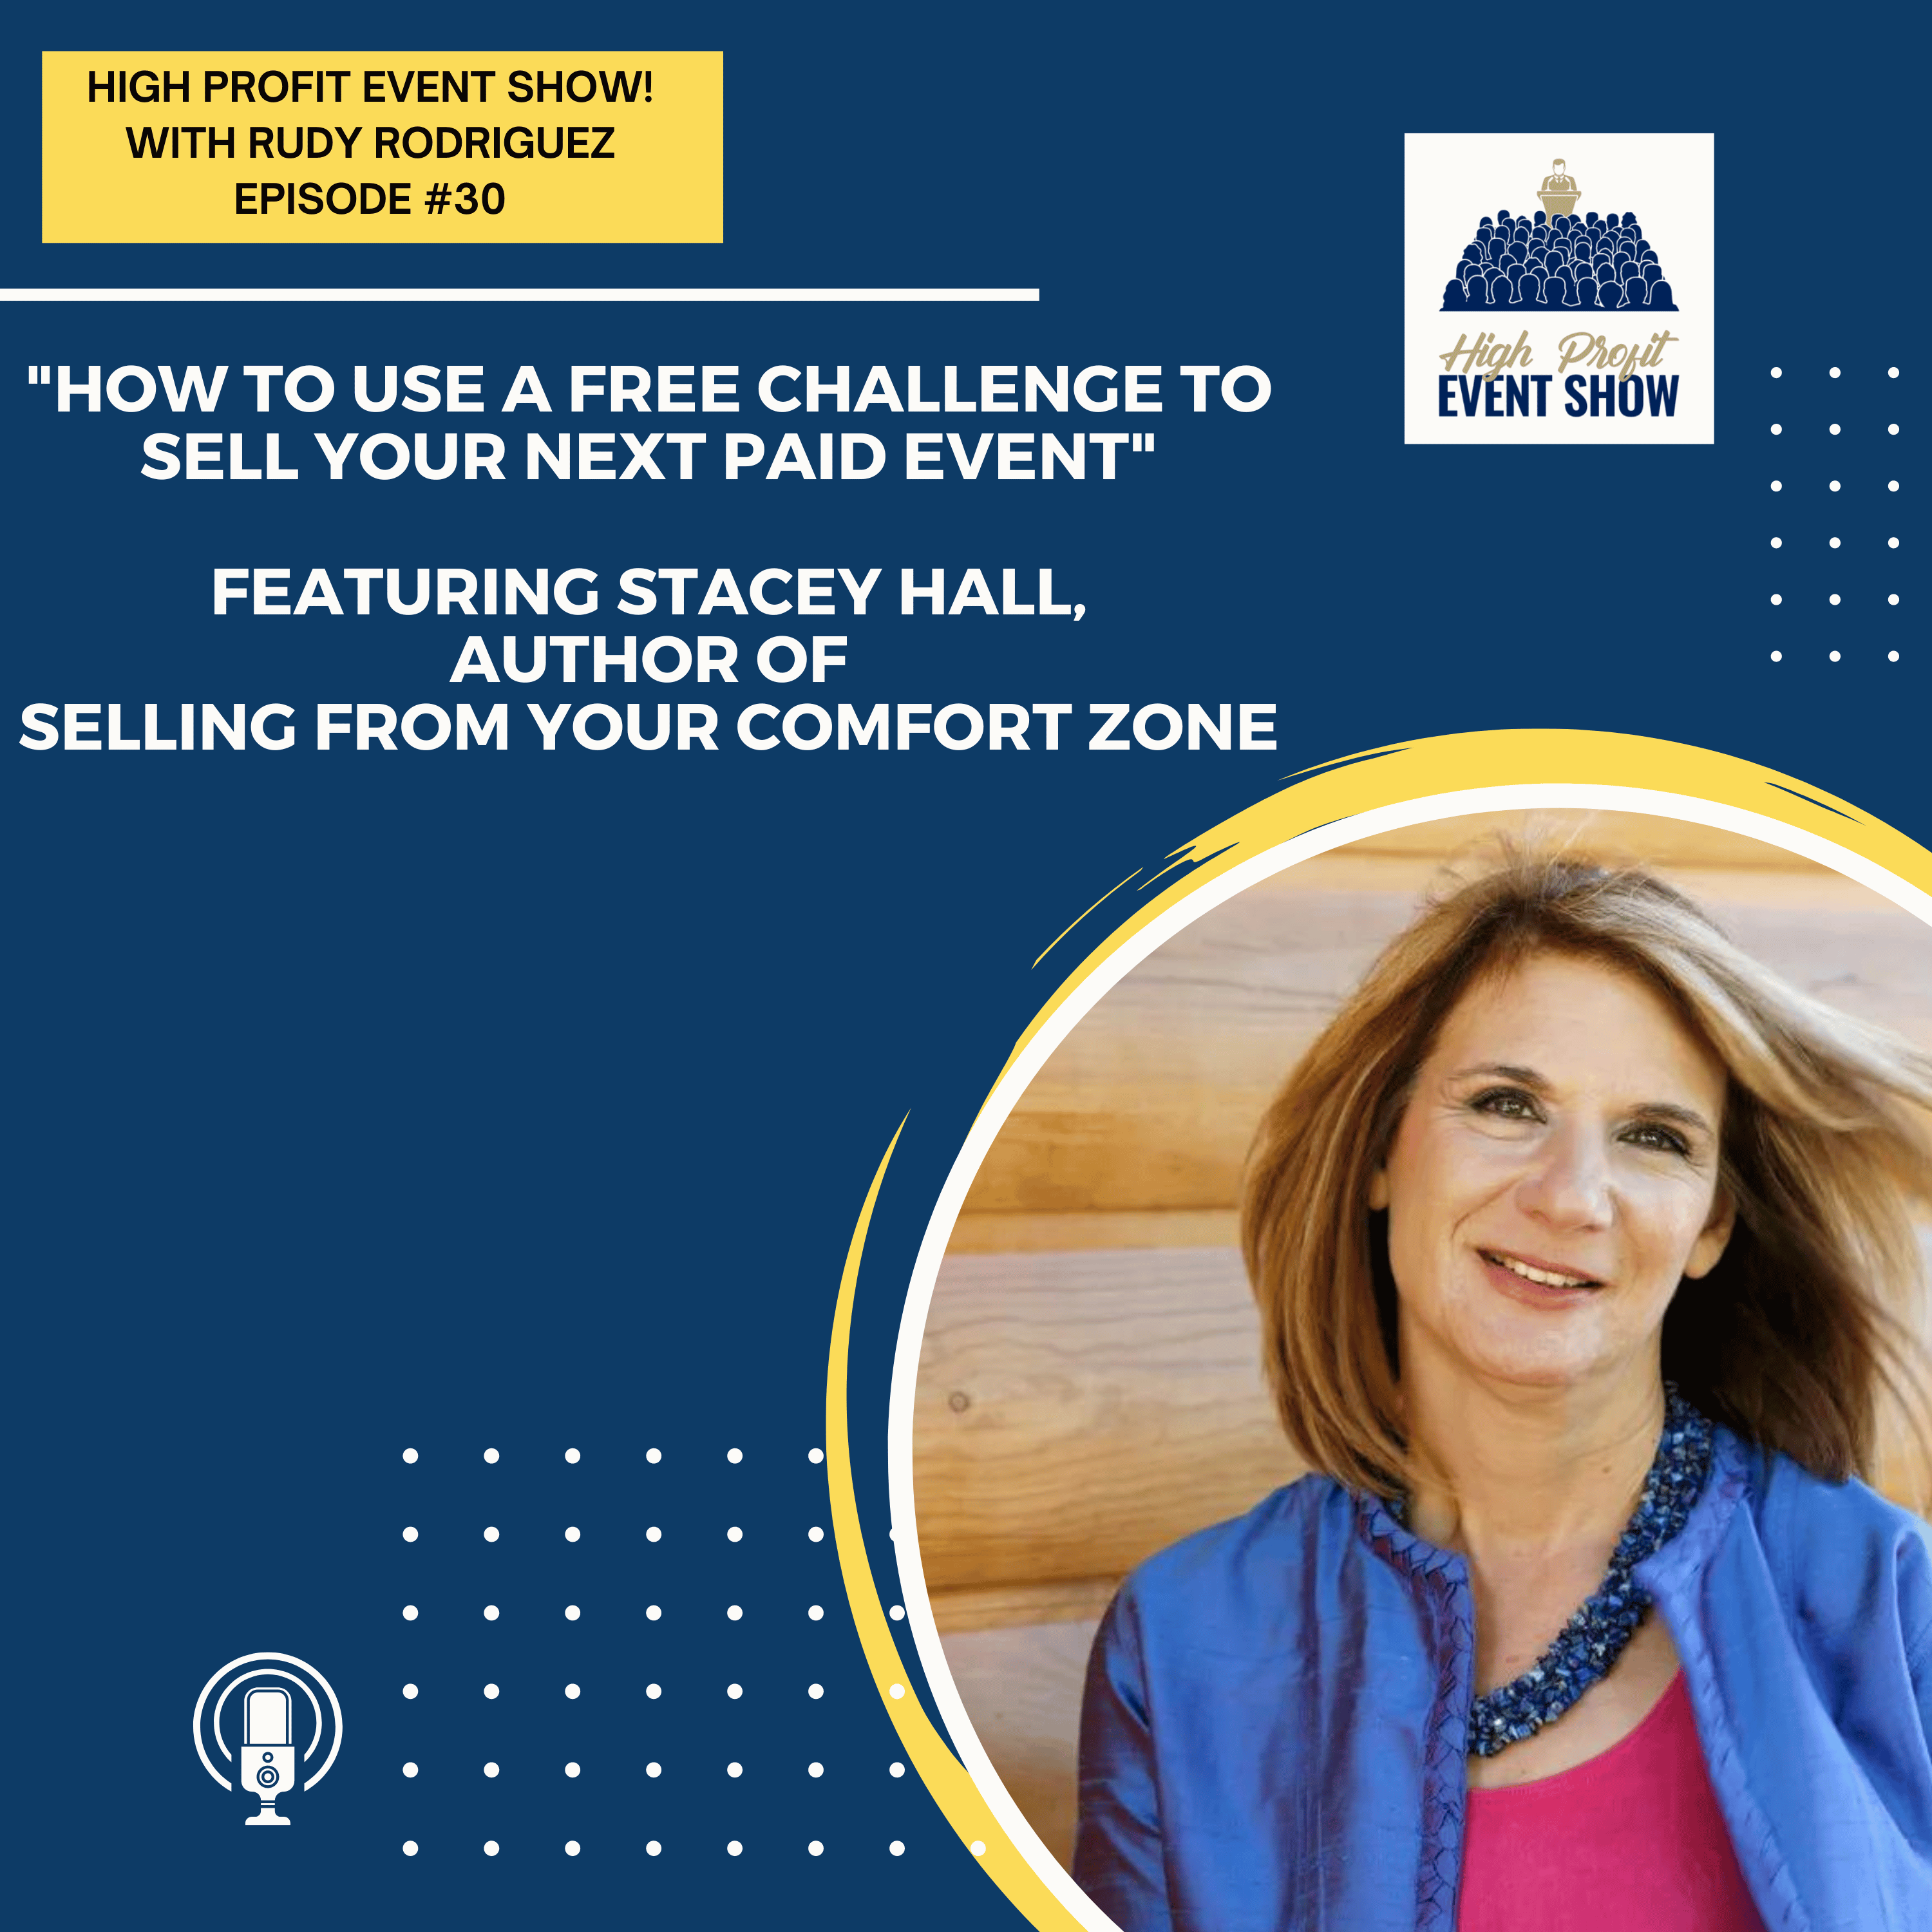 Episode 30: How to Use a Free Challenge to Sell Your Next Paid Event with Stacey Hall!